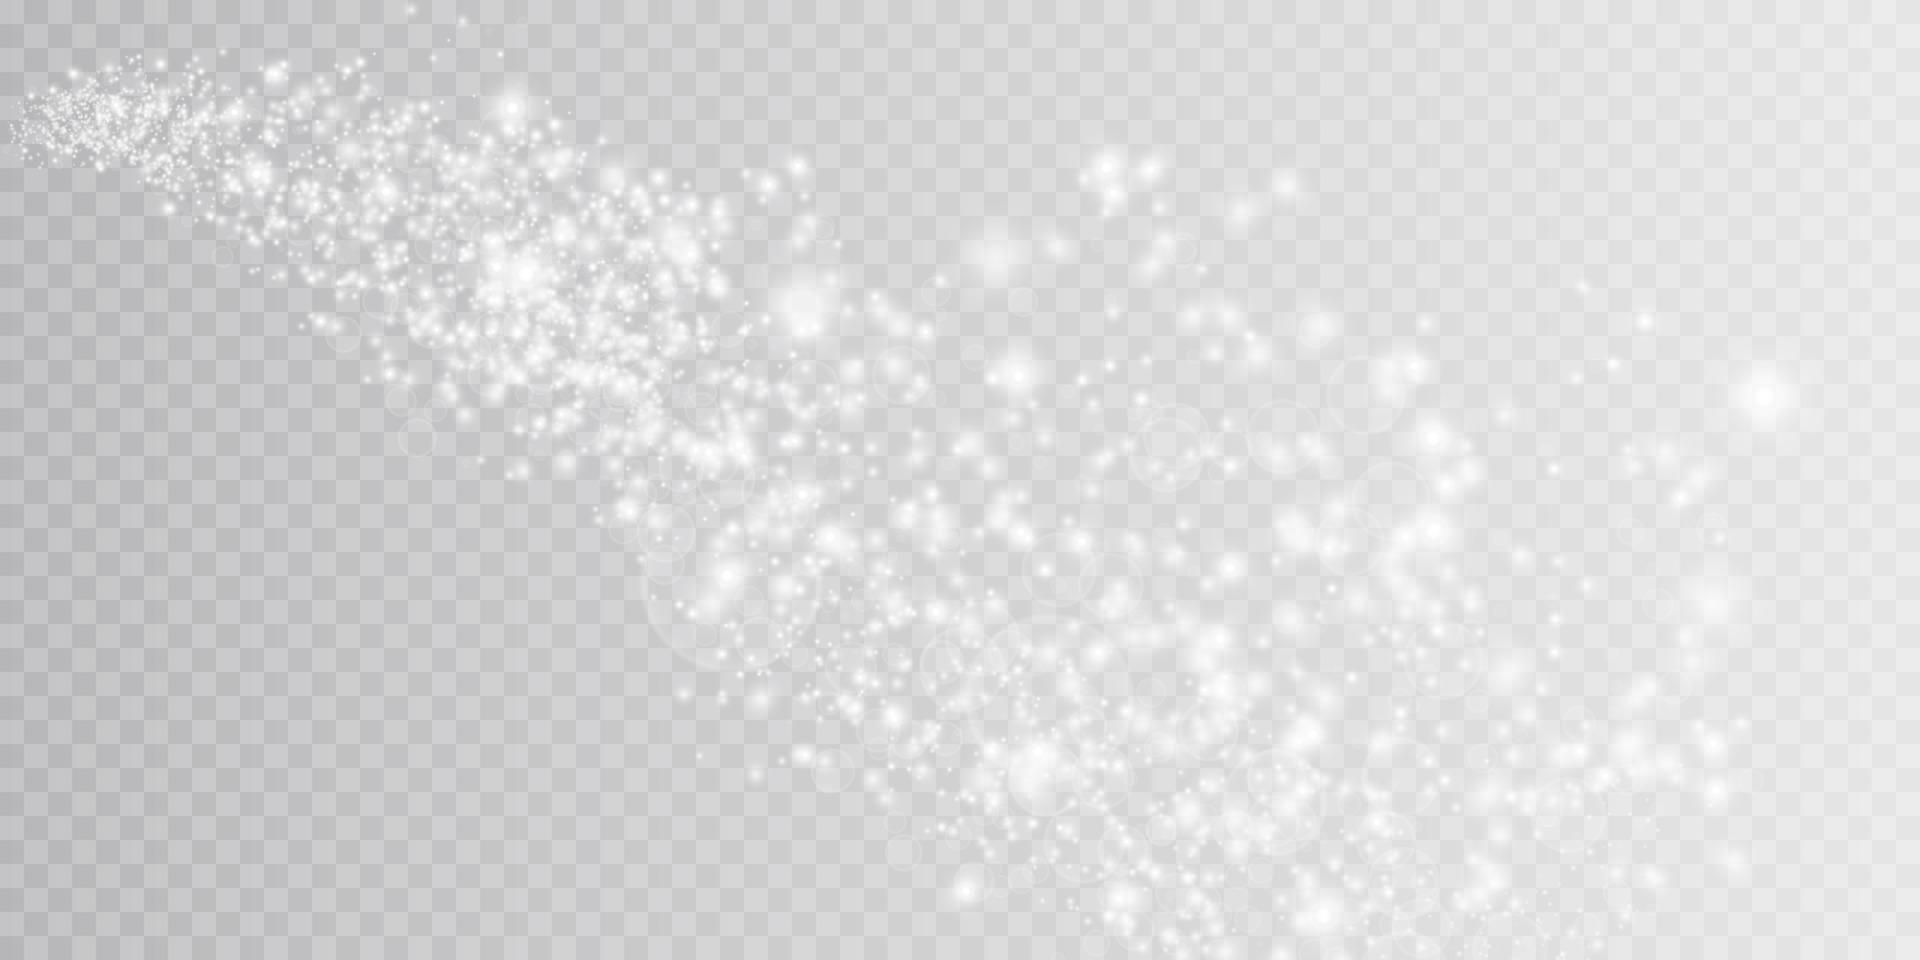 White Bokeh light lights effect background. Christmas background of shining dust Christmas glowing light bokeh confetti and spark overlay texture for your design. vector